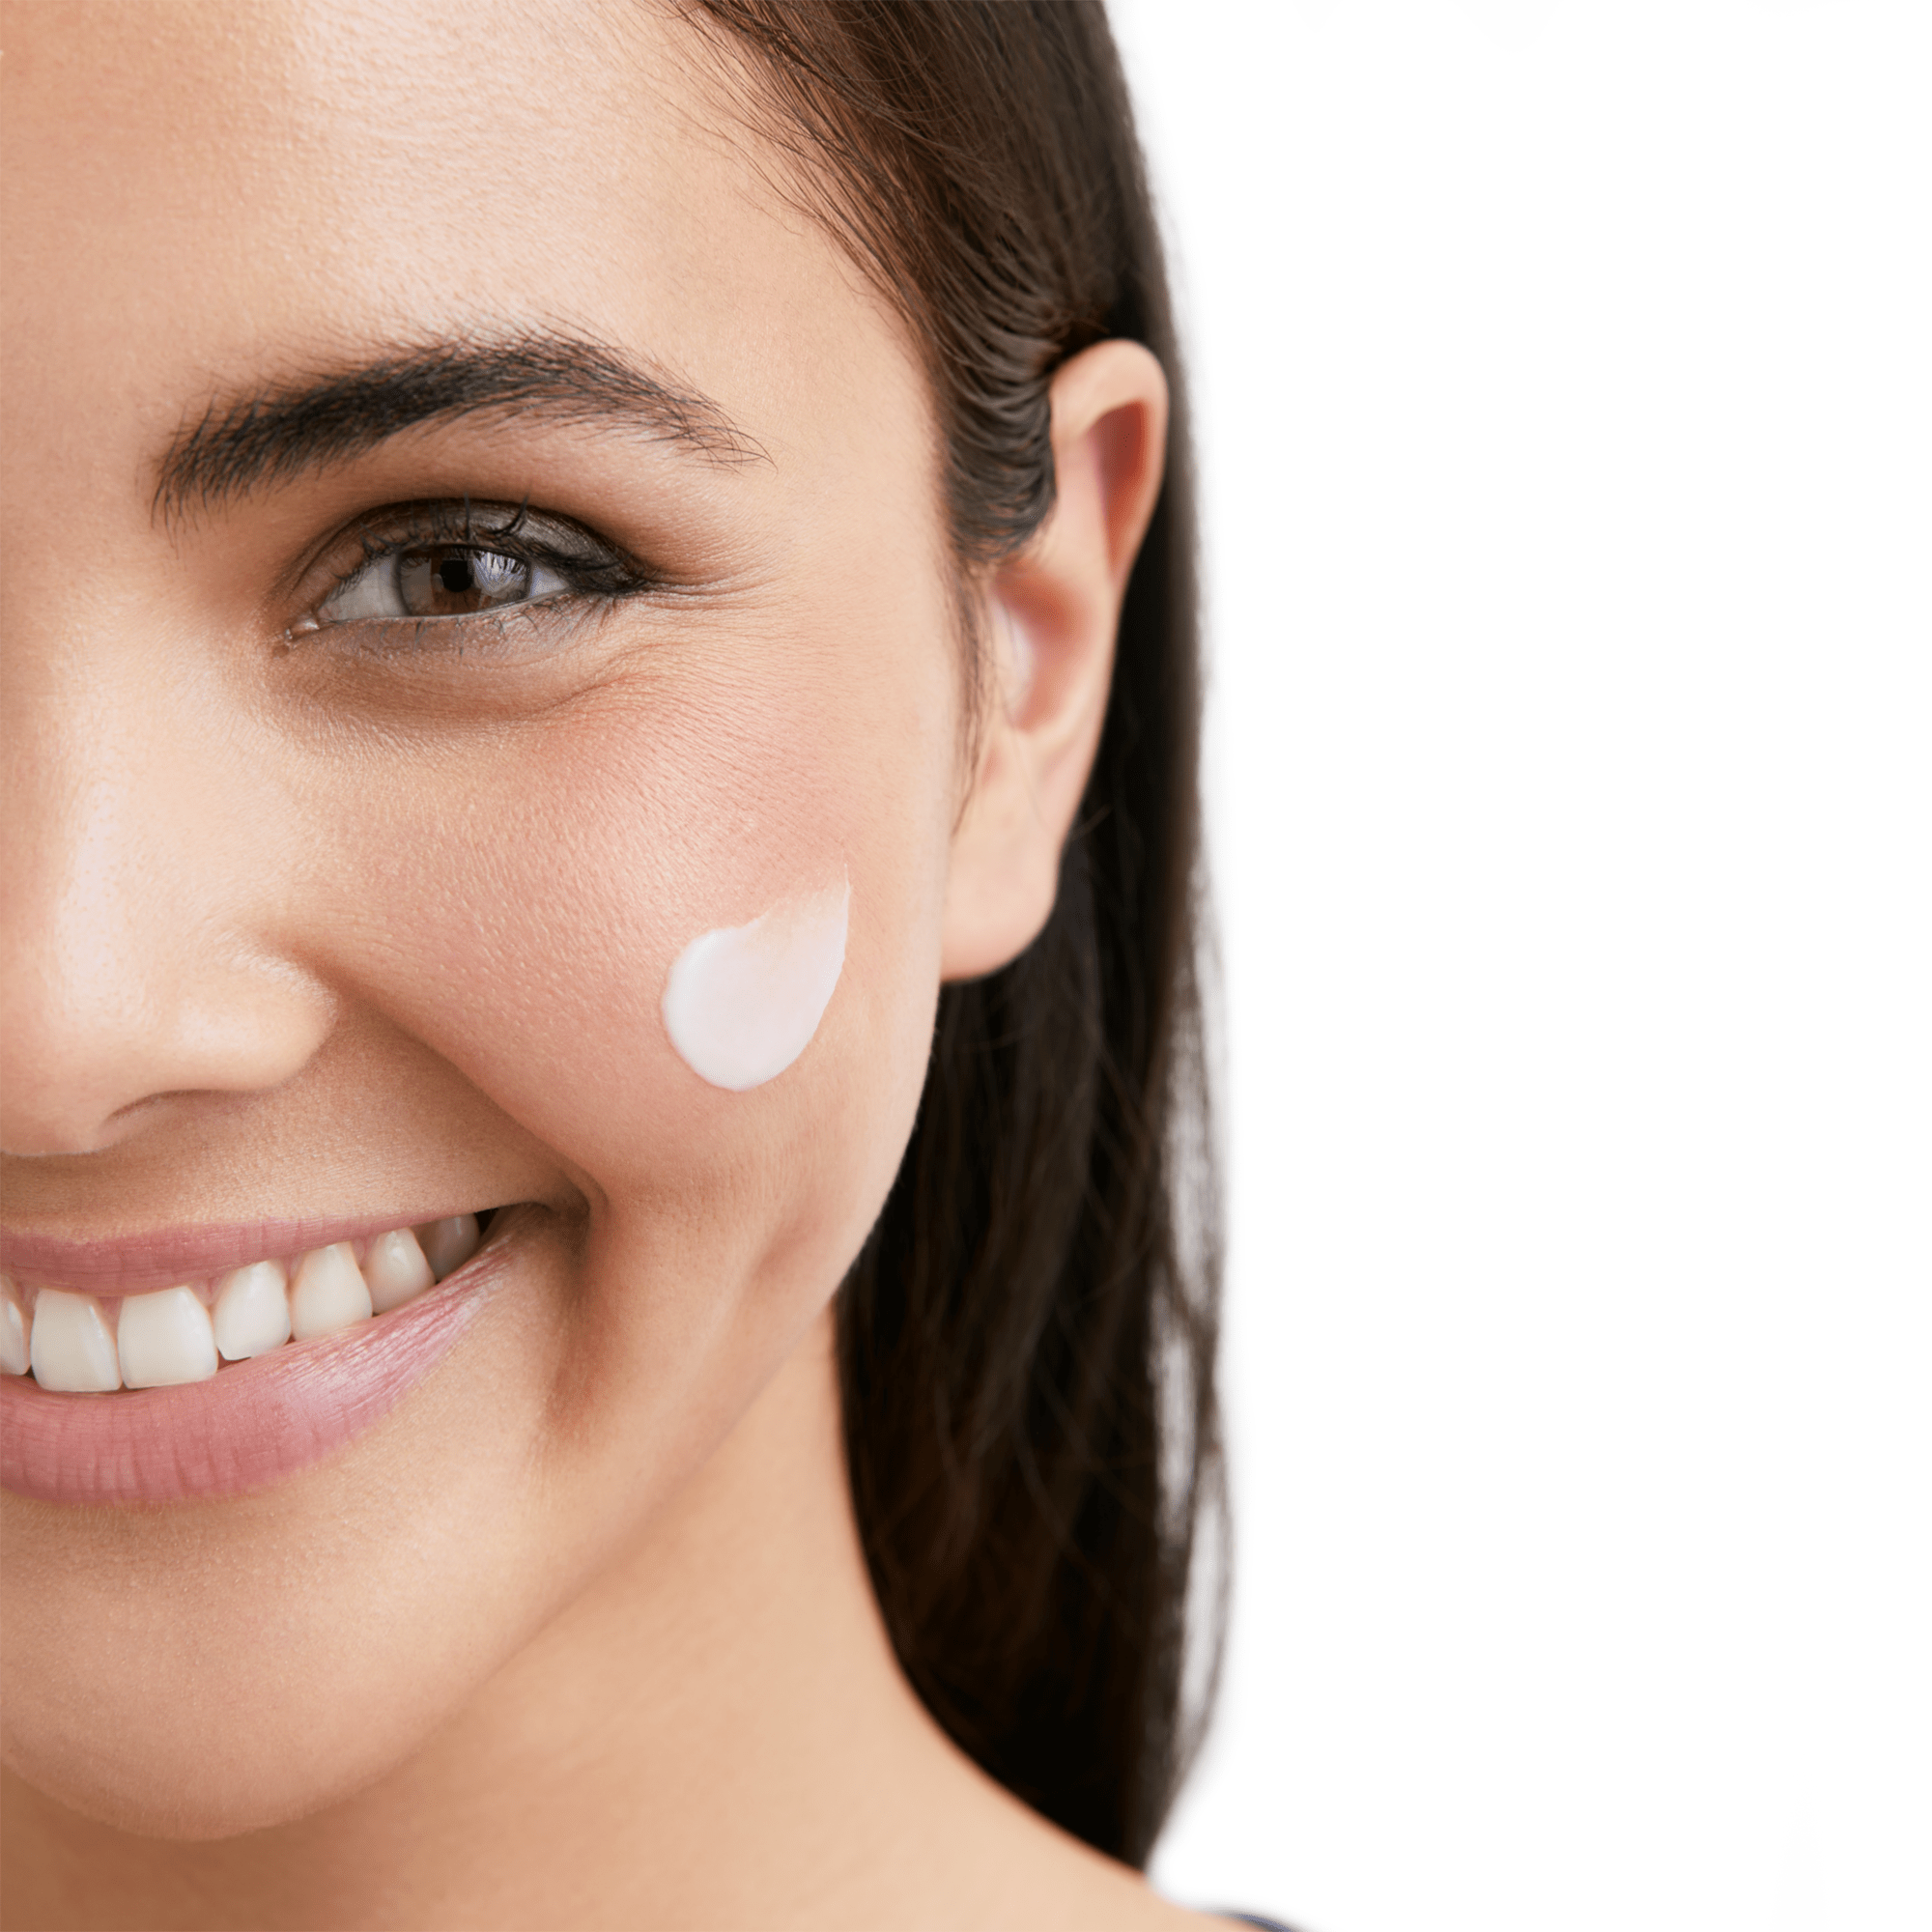 woman using cream as part of dry skin routine